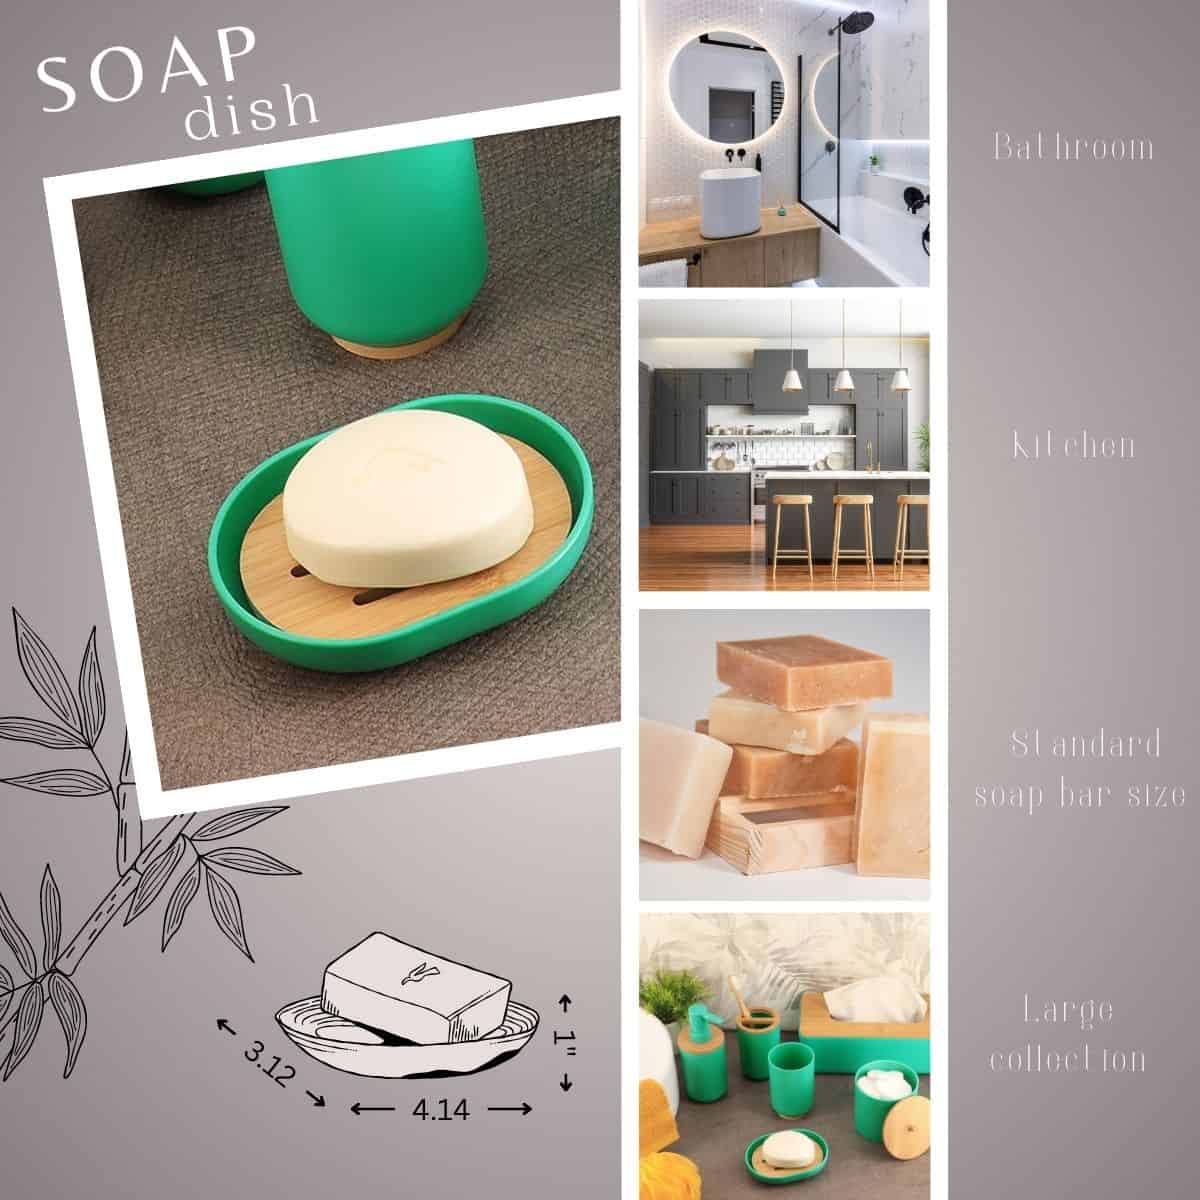 soap dish with bamboo drainer for air circulation